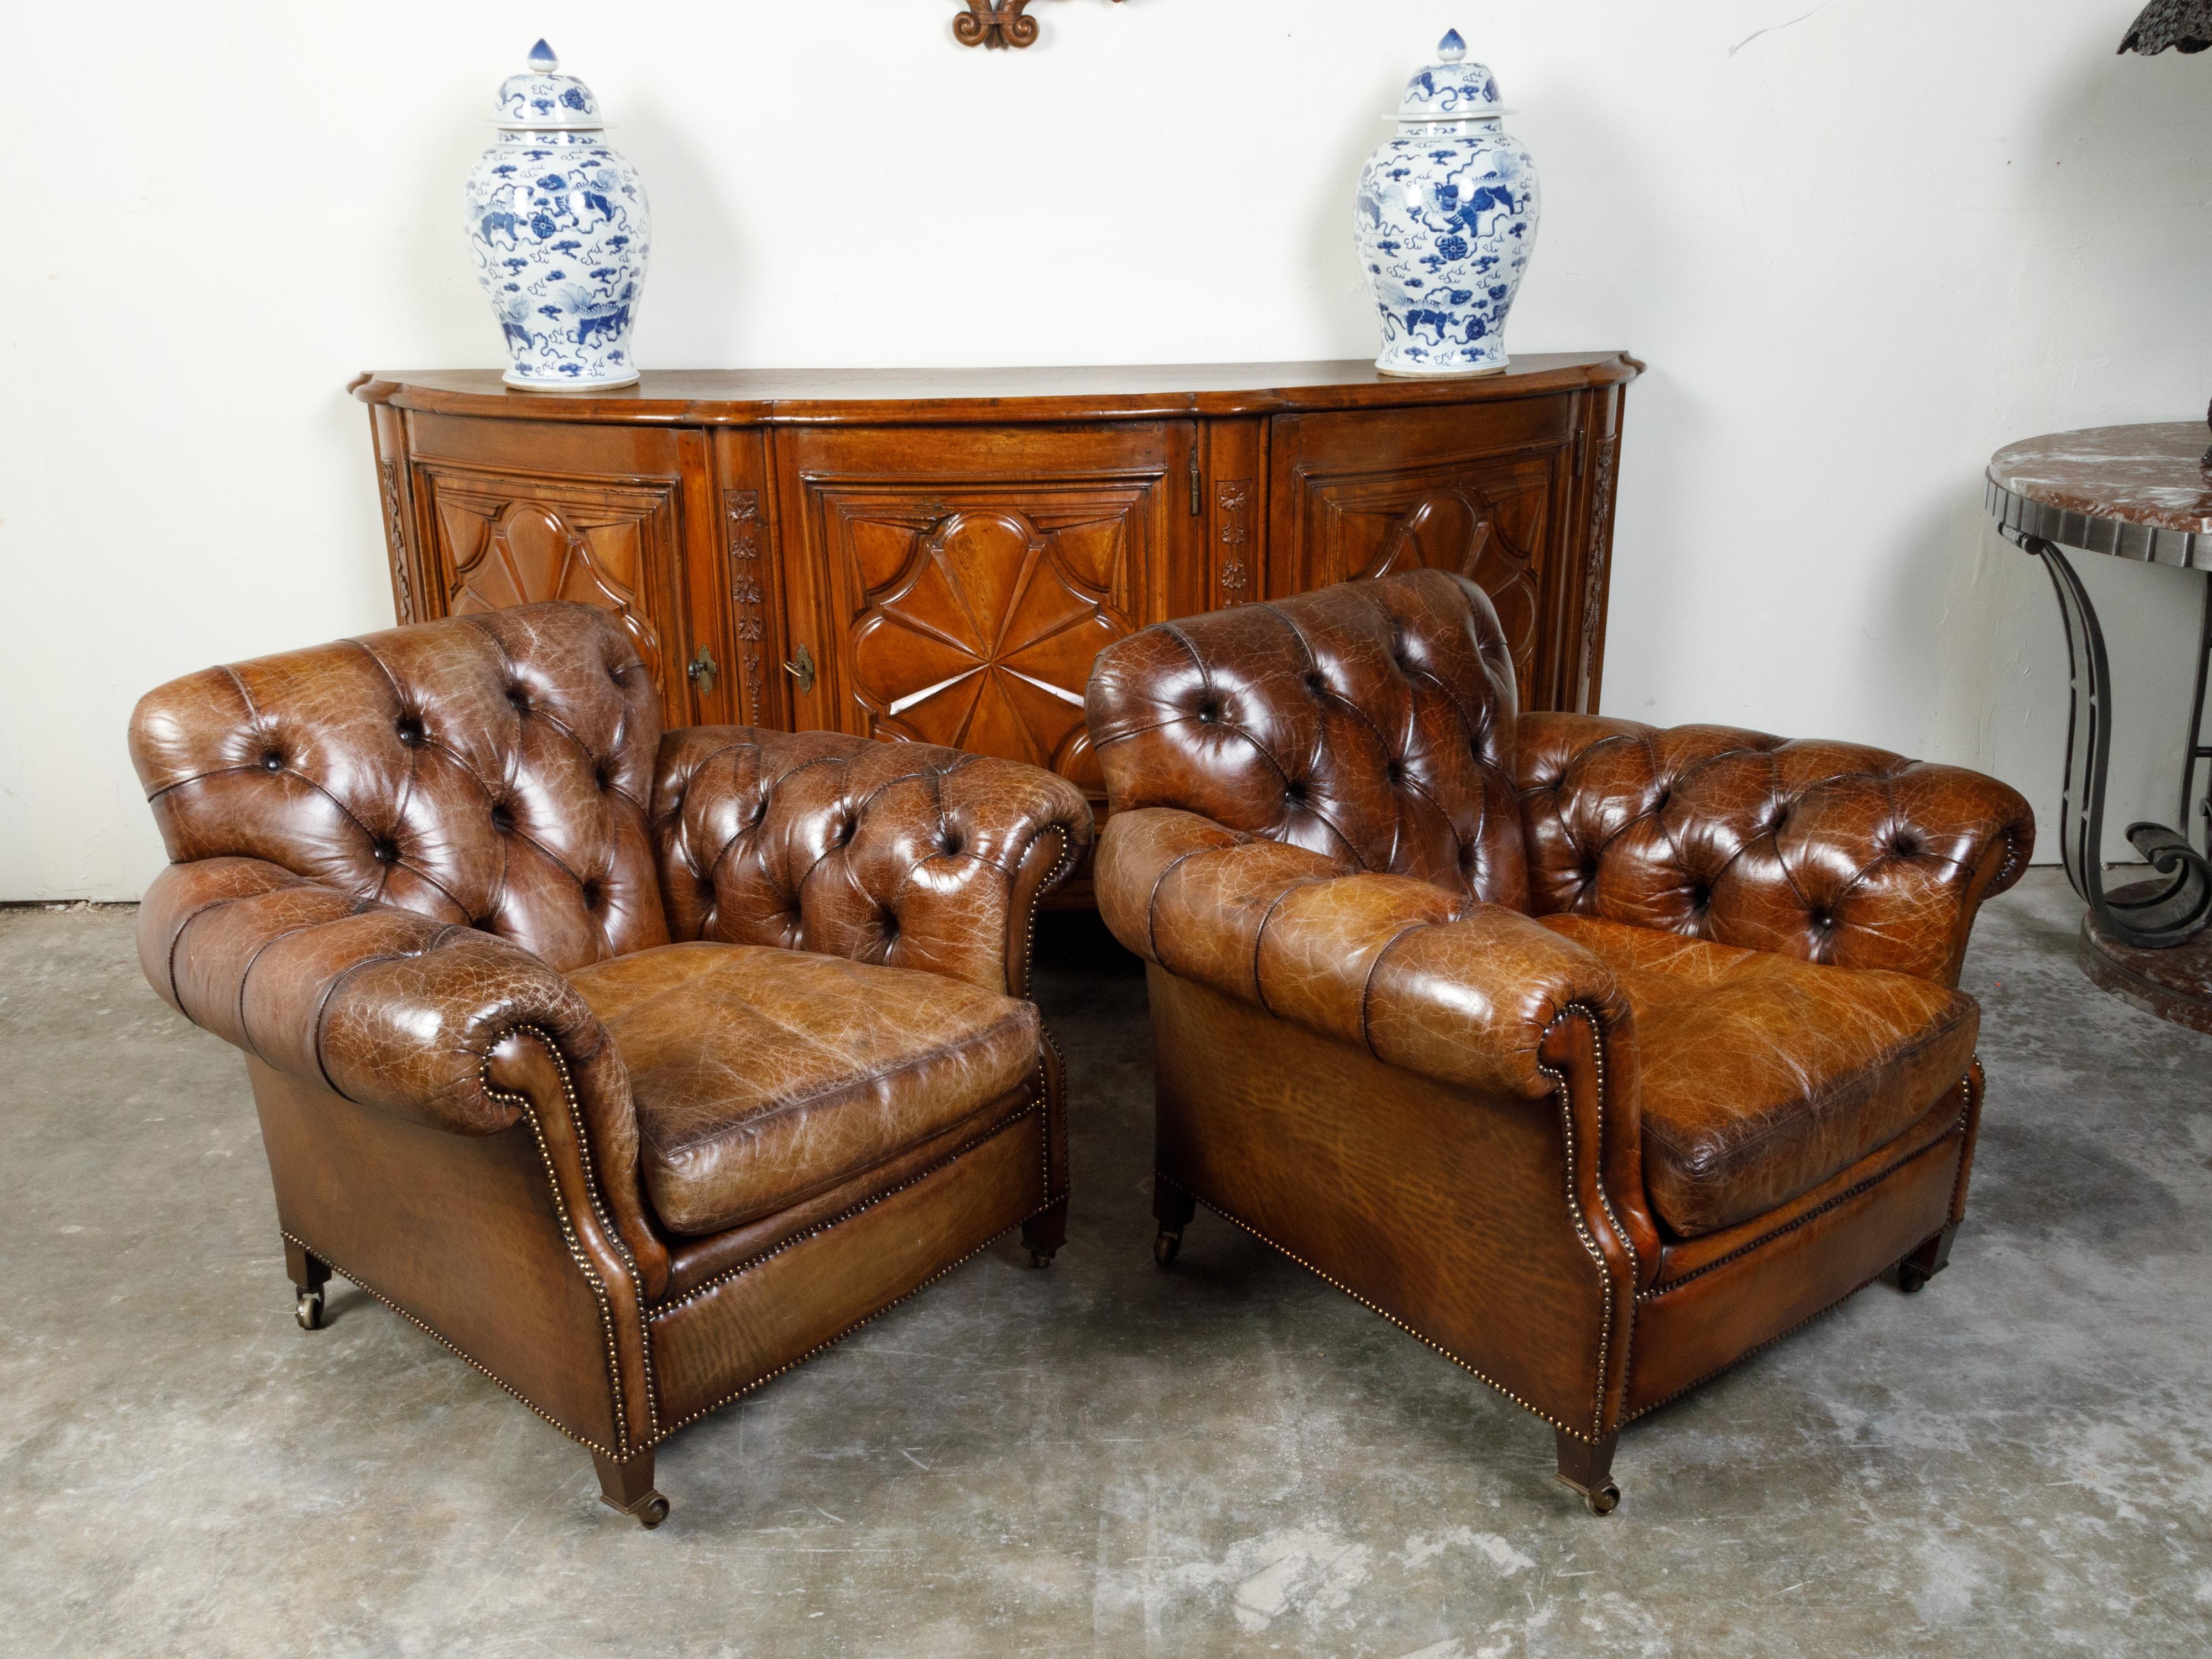 Pair of English Midcentury Tufted Leather Club Chairs with Nailheads and Casters 6